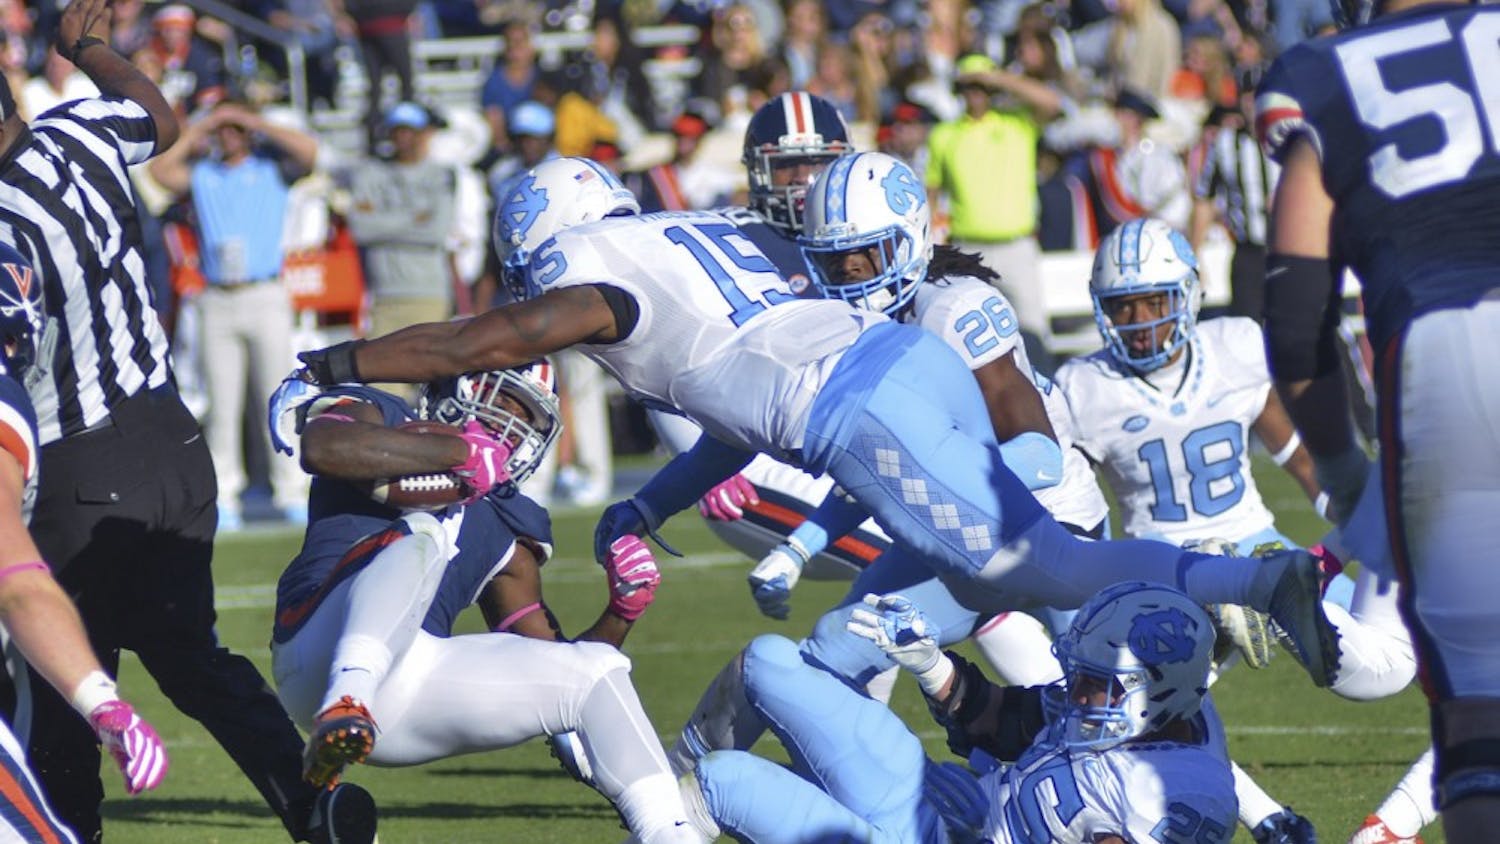 Donnie Miles (15) tackles a Virginia player. UNC defeated UVA 35-14 on Saturday, October 23.